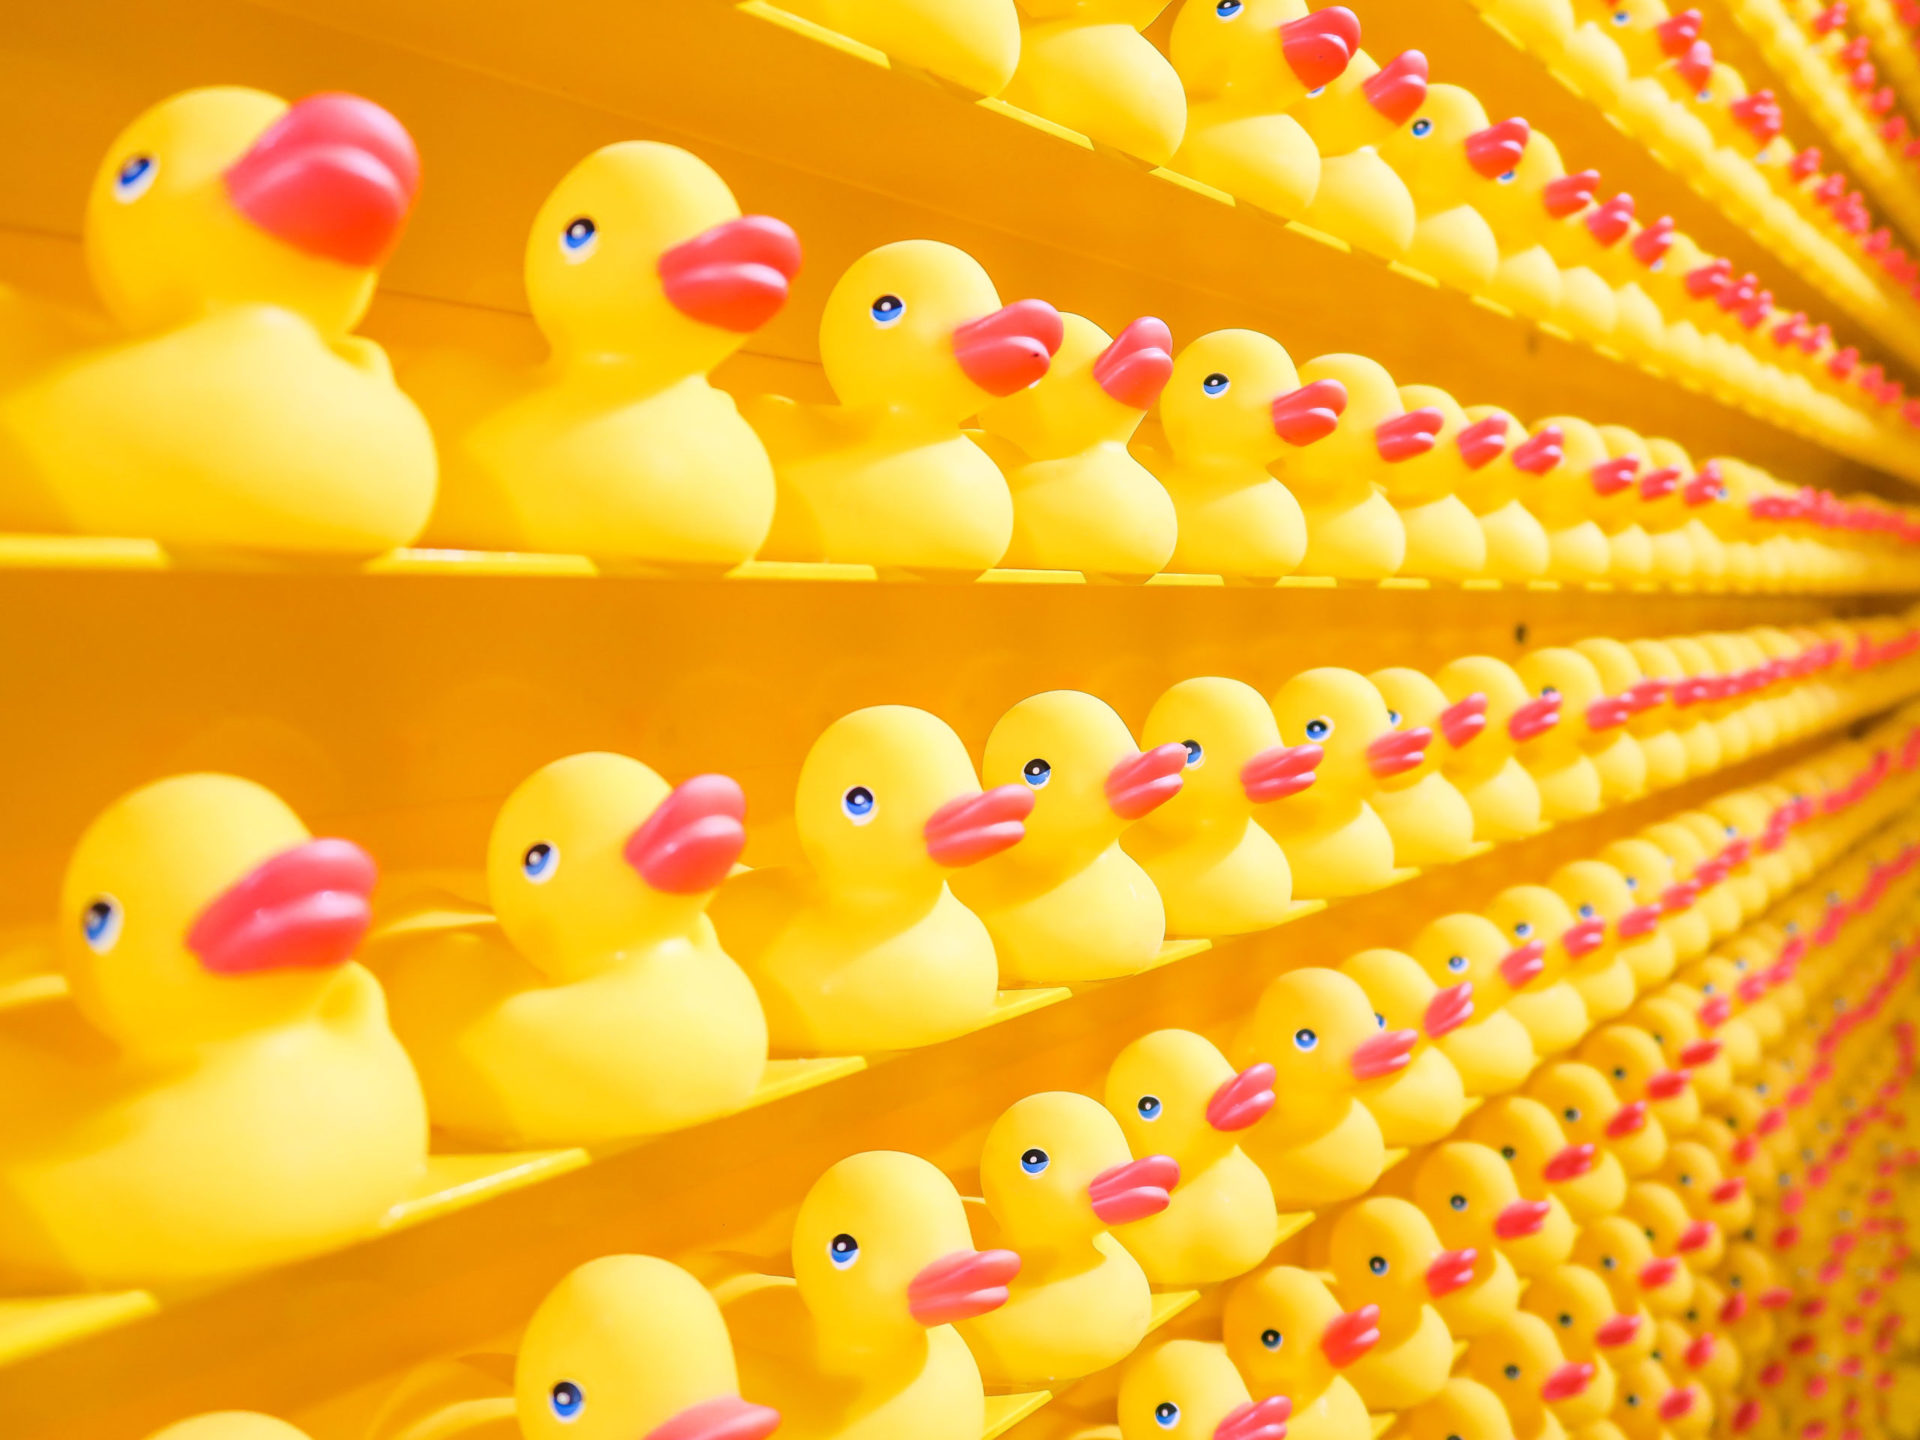 Yellow shelves upon yellow shelves of yellow rubber ducks with red bills